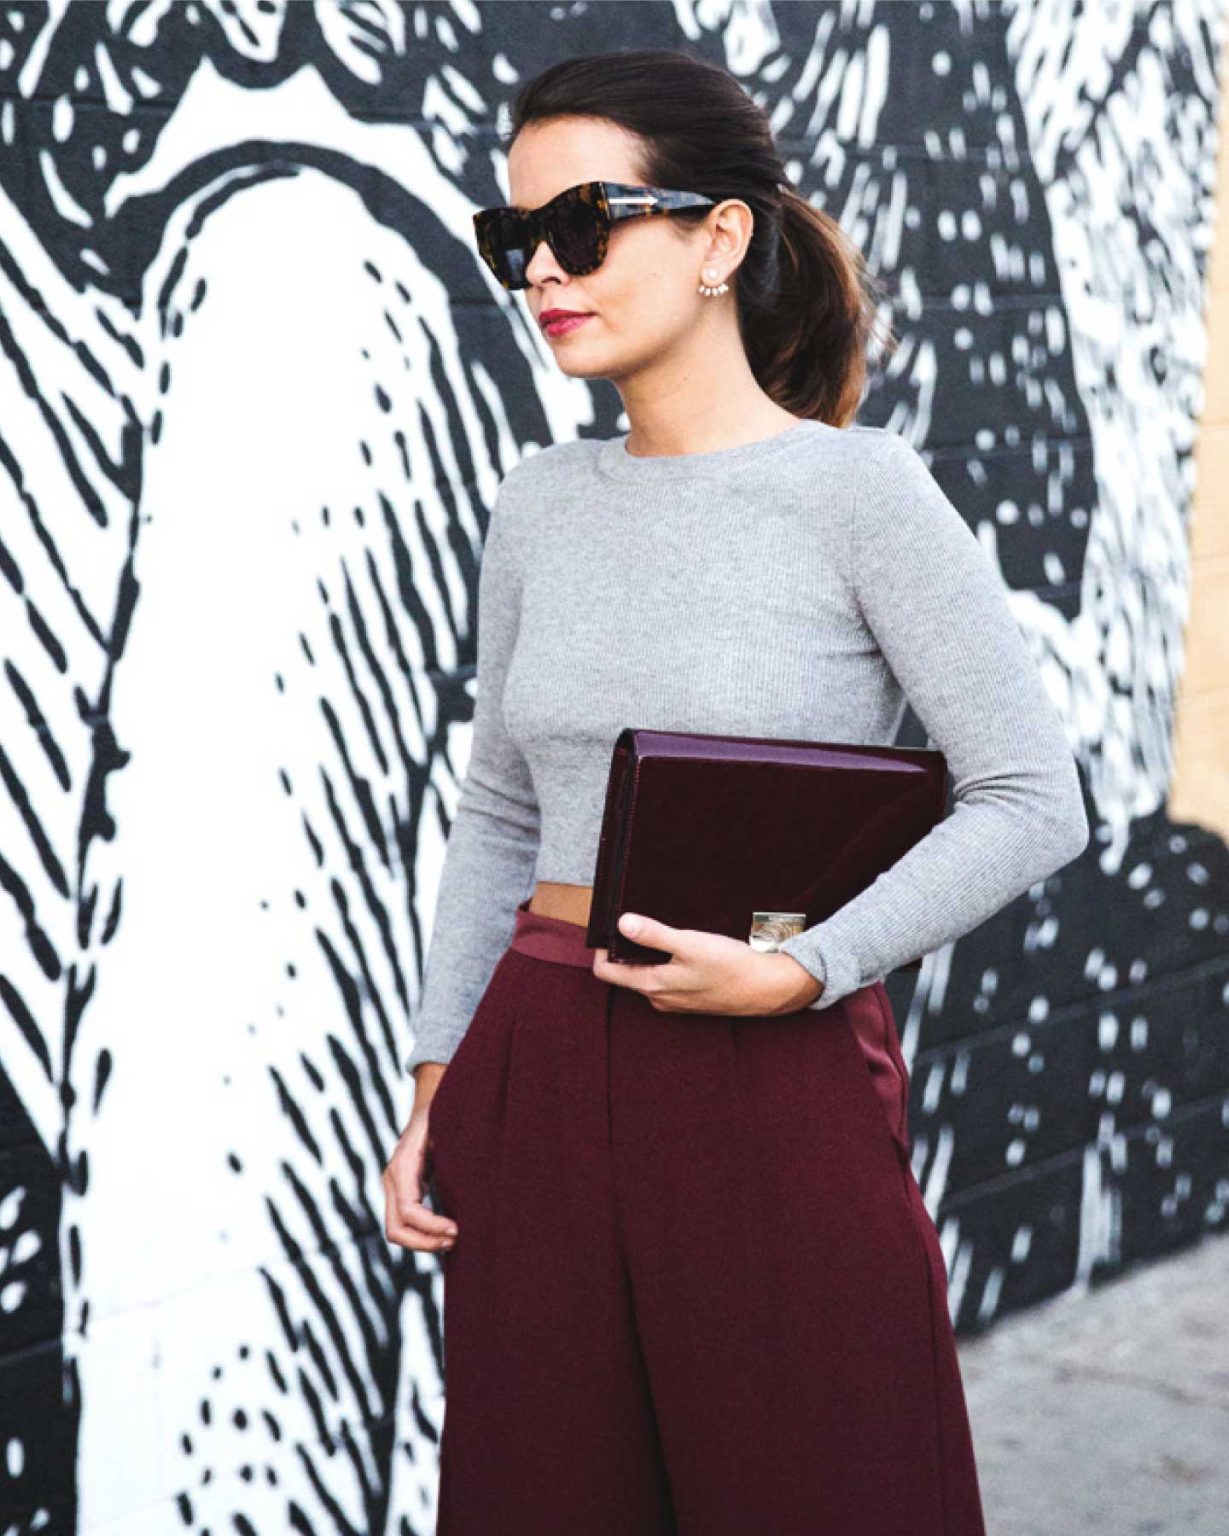 15 Ways to Wear Burgundy or Maroon Pants | Cute outfits, Maroon pants,  Business casual outfits